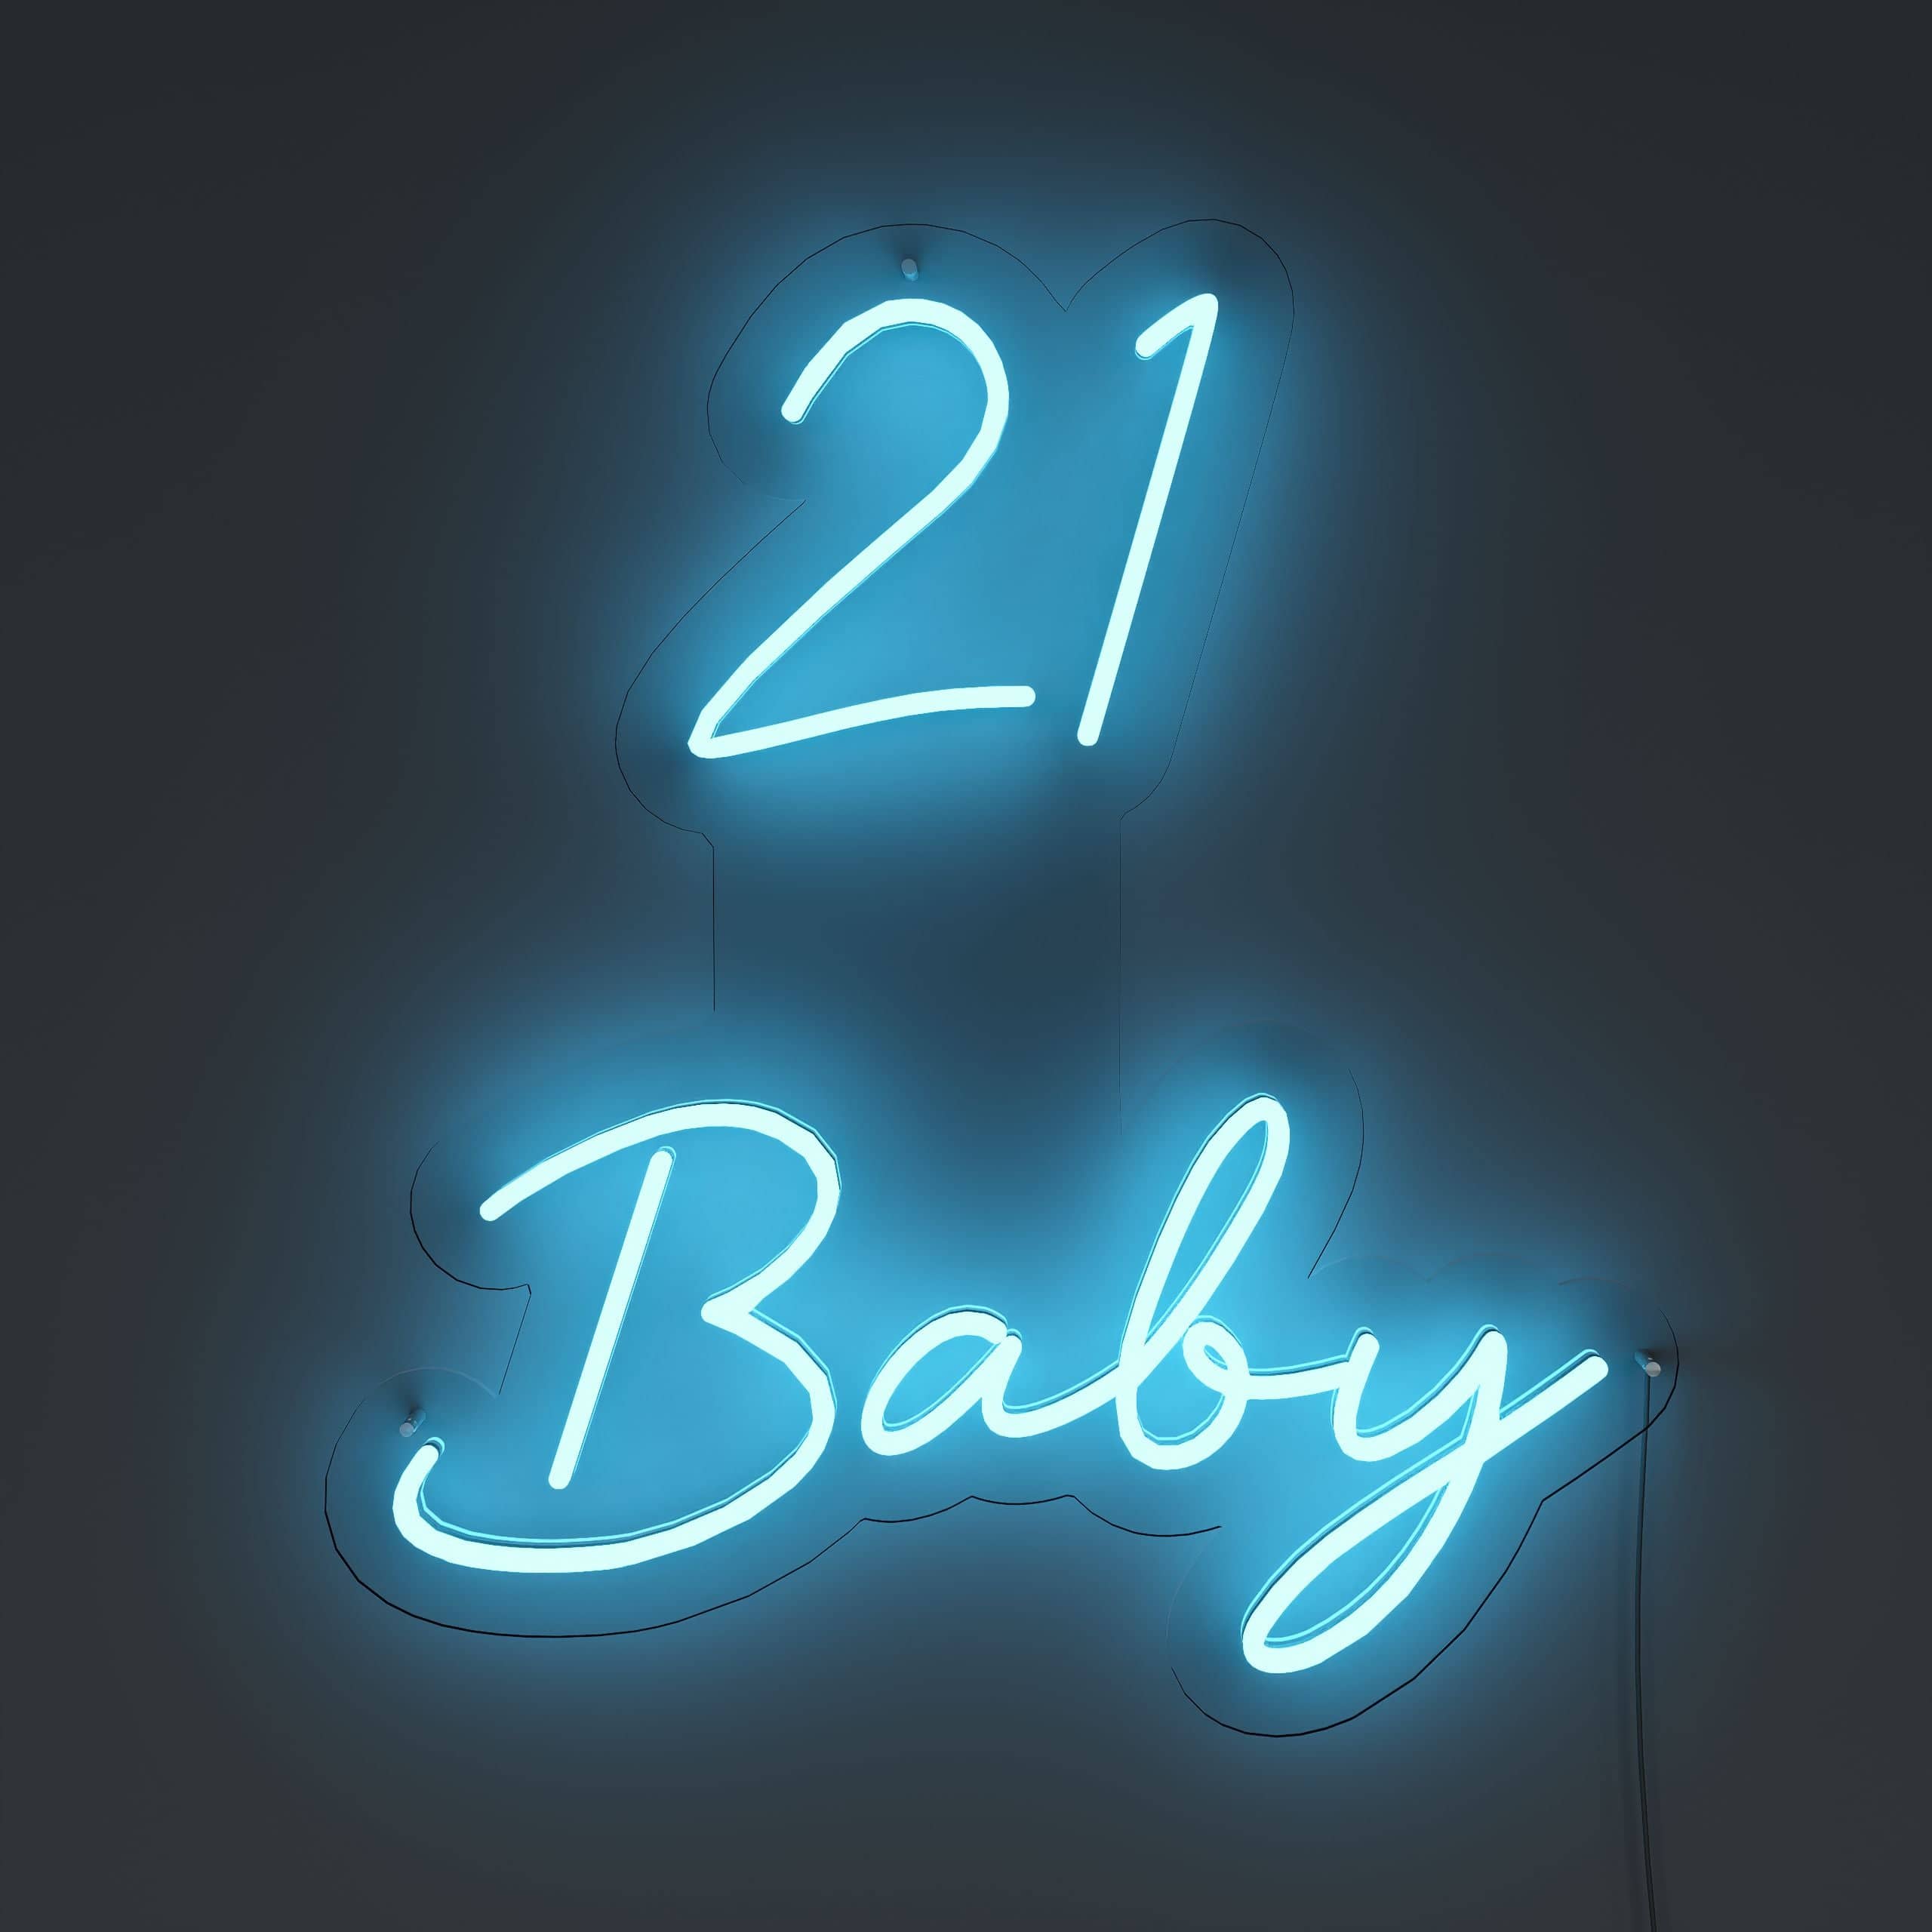 it's-time-to-make-unforgettable-memories-at-21!-neon-sign-lite